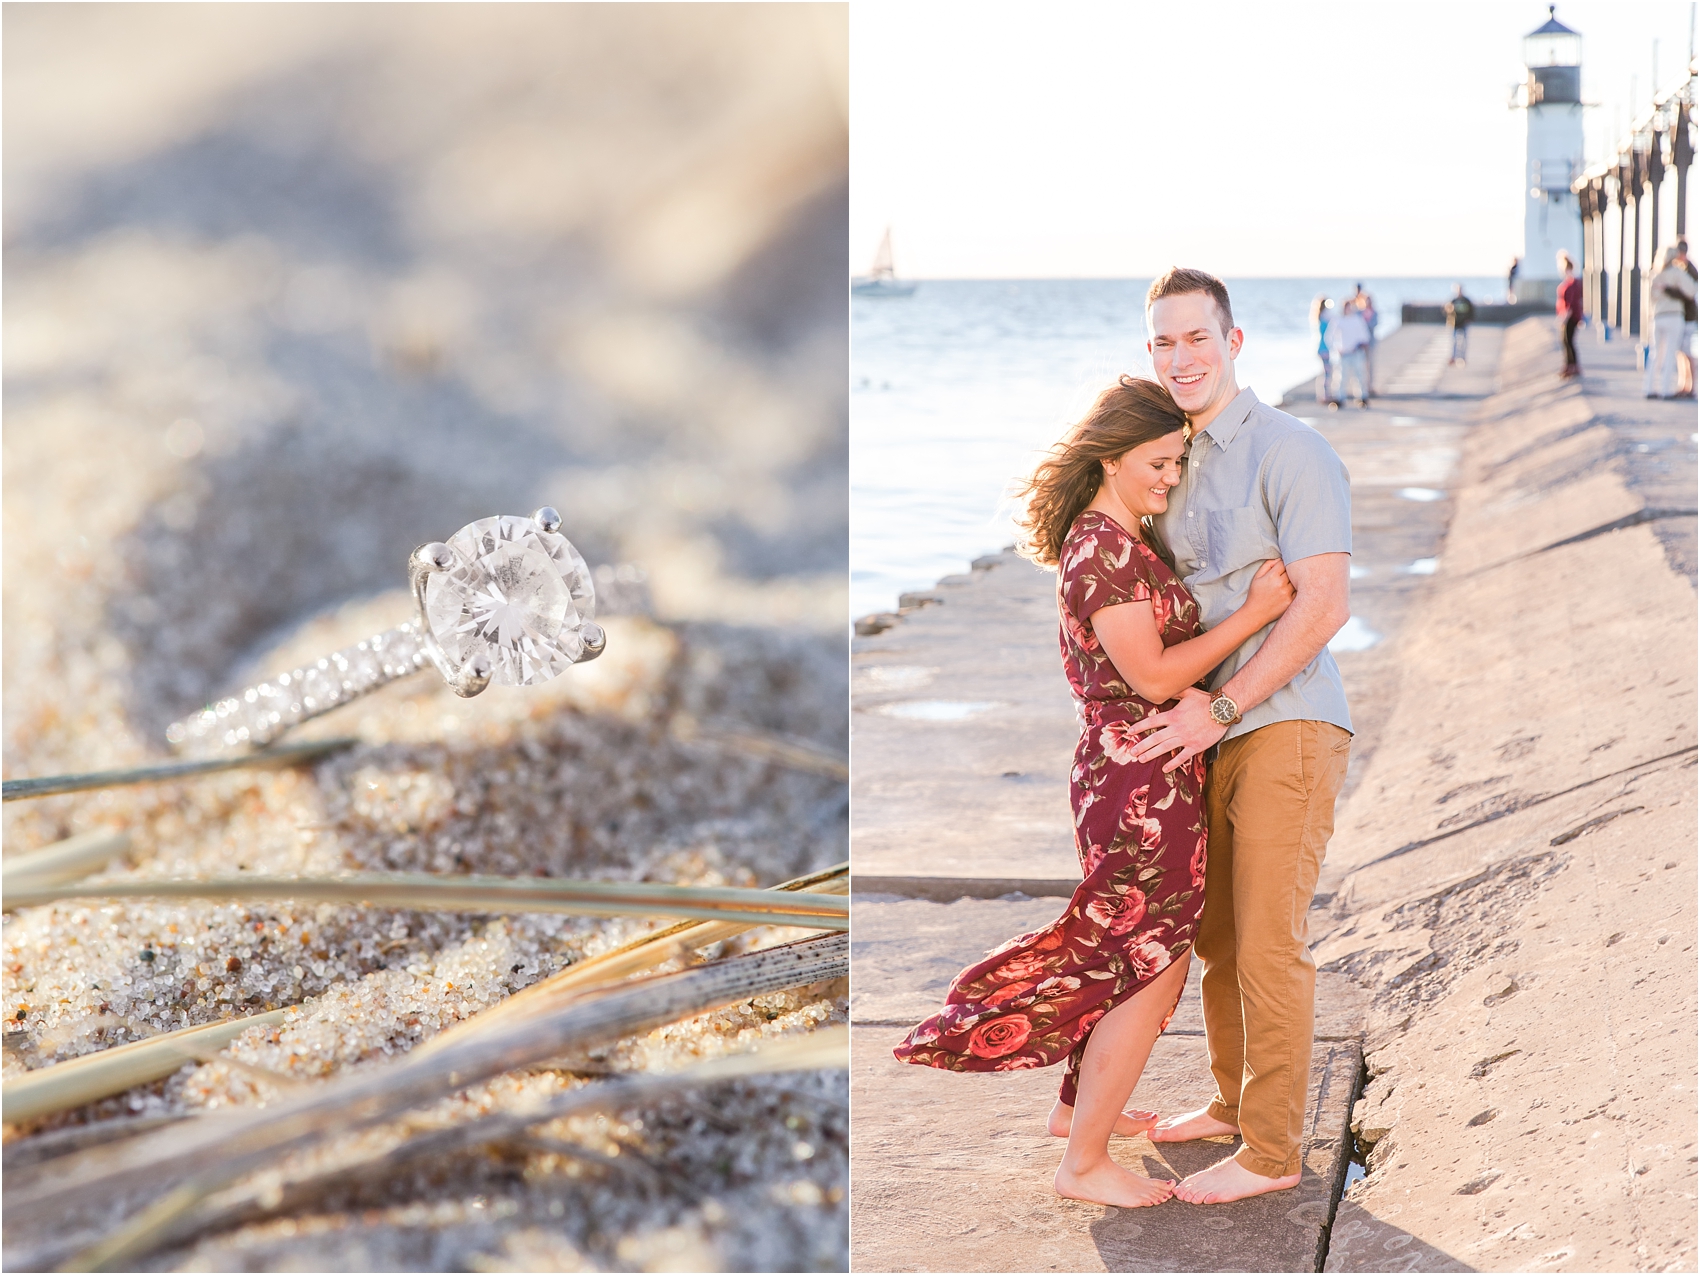 candid-end-of-summer-sunset-engagement-photos-at-silver-beach-in-st-joseph-mi-by-courtney-carolyn-photography_0022.jpg